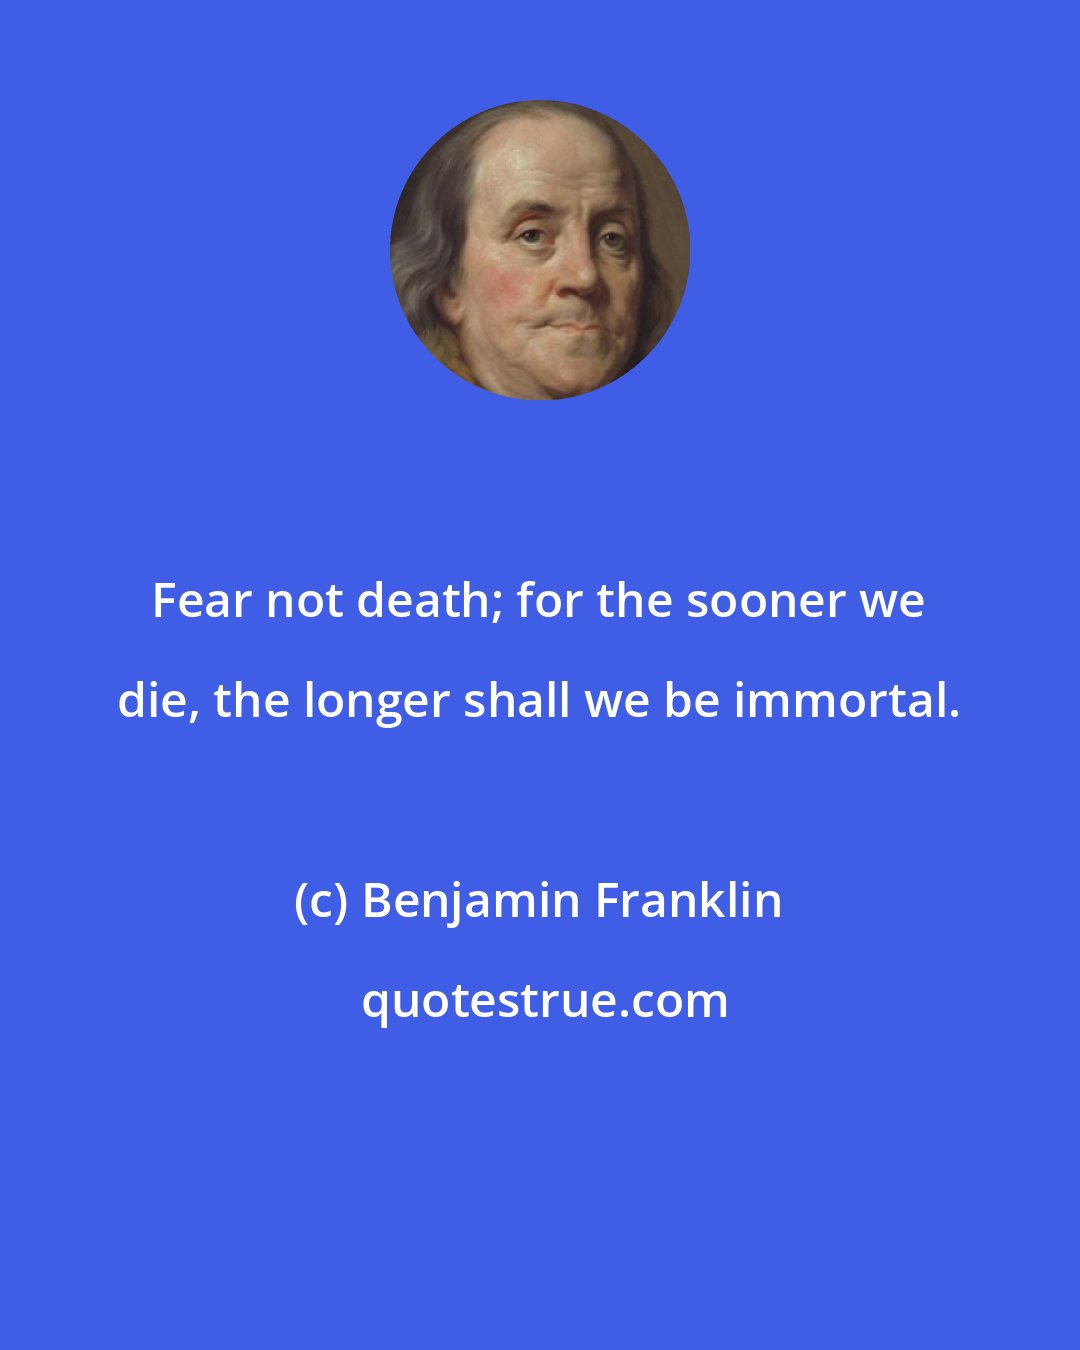 Benjamin Franklin: Fear not death; for the sooner we die, the longer shall we be immortal.